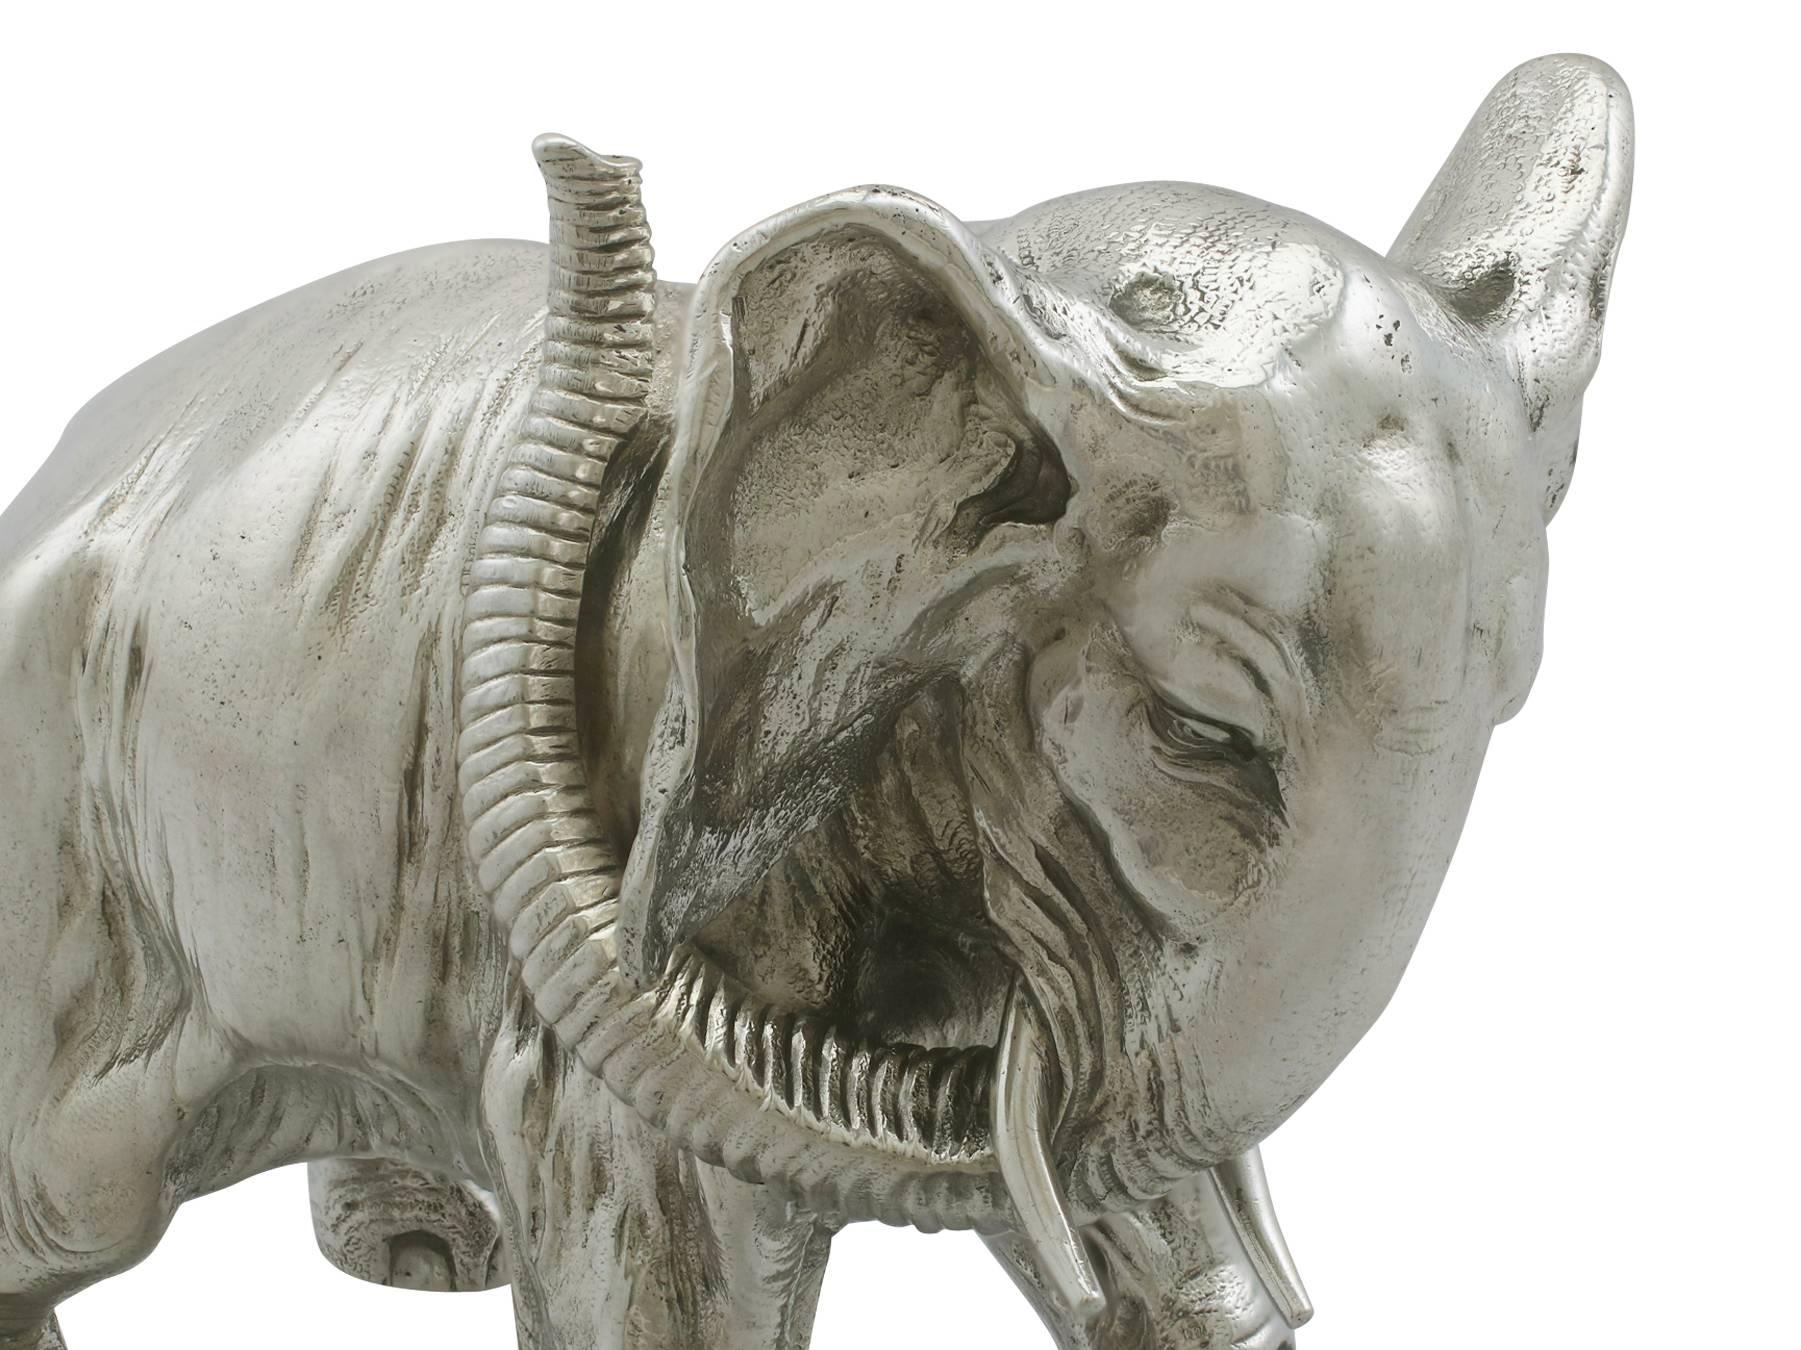 Late 19th Century 1890s Antique Russian Silver Table Ornament of an Elephant by Karl Fabergé